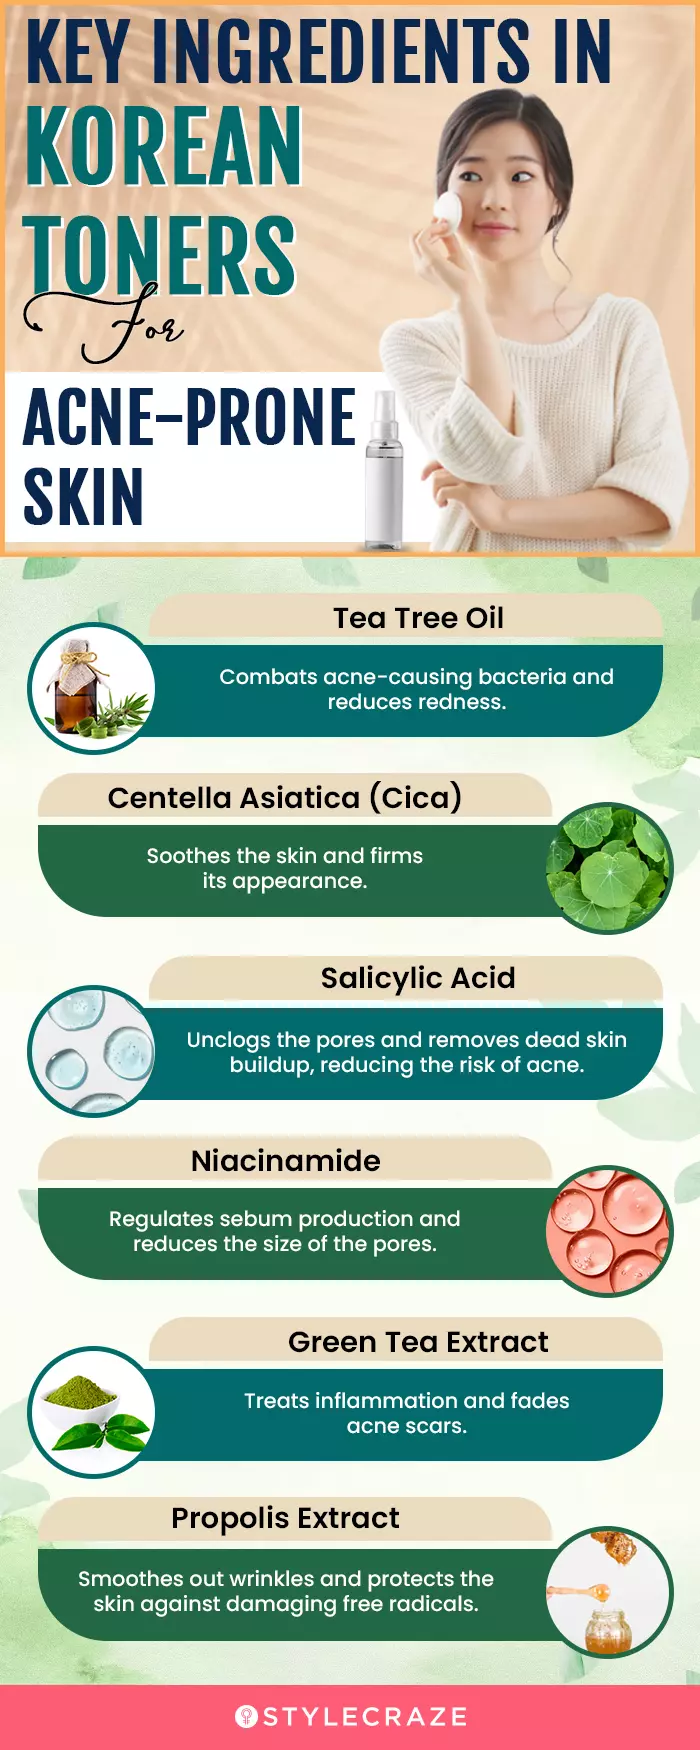 Key Ingredients In Korean Toners For Acne-Prone Skin (infographic)